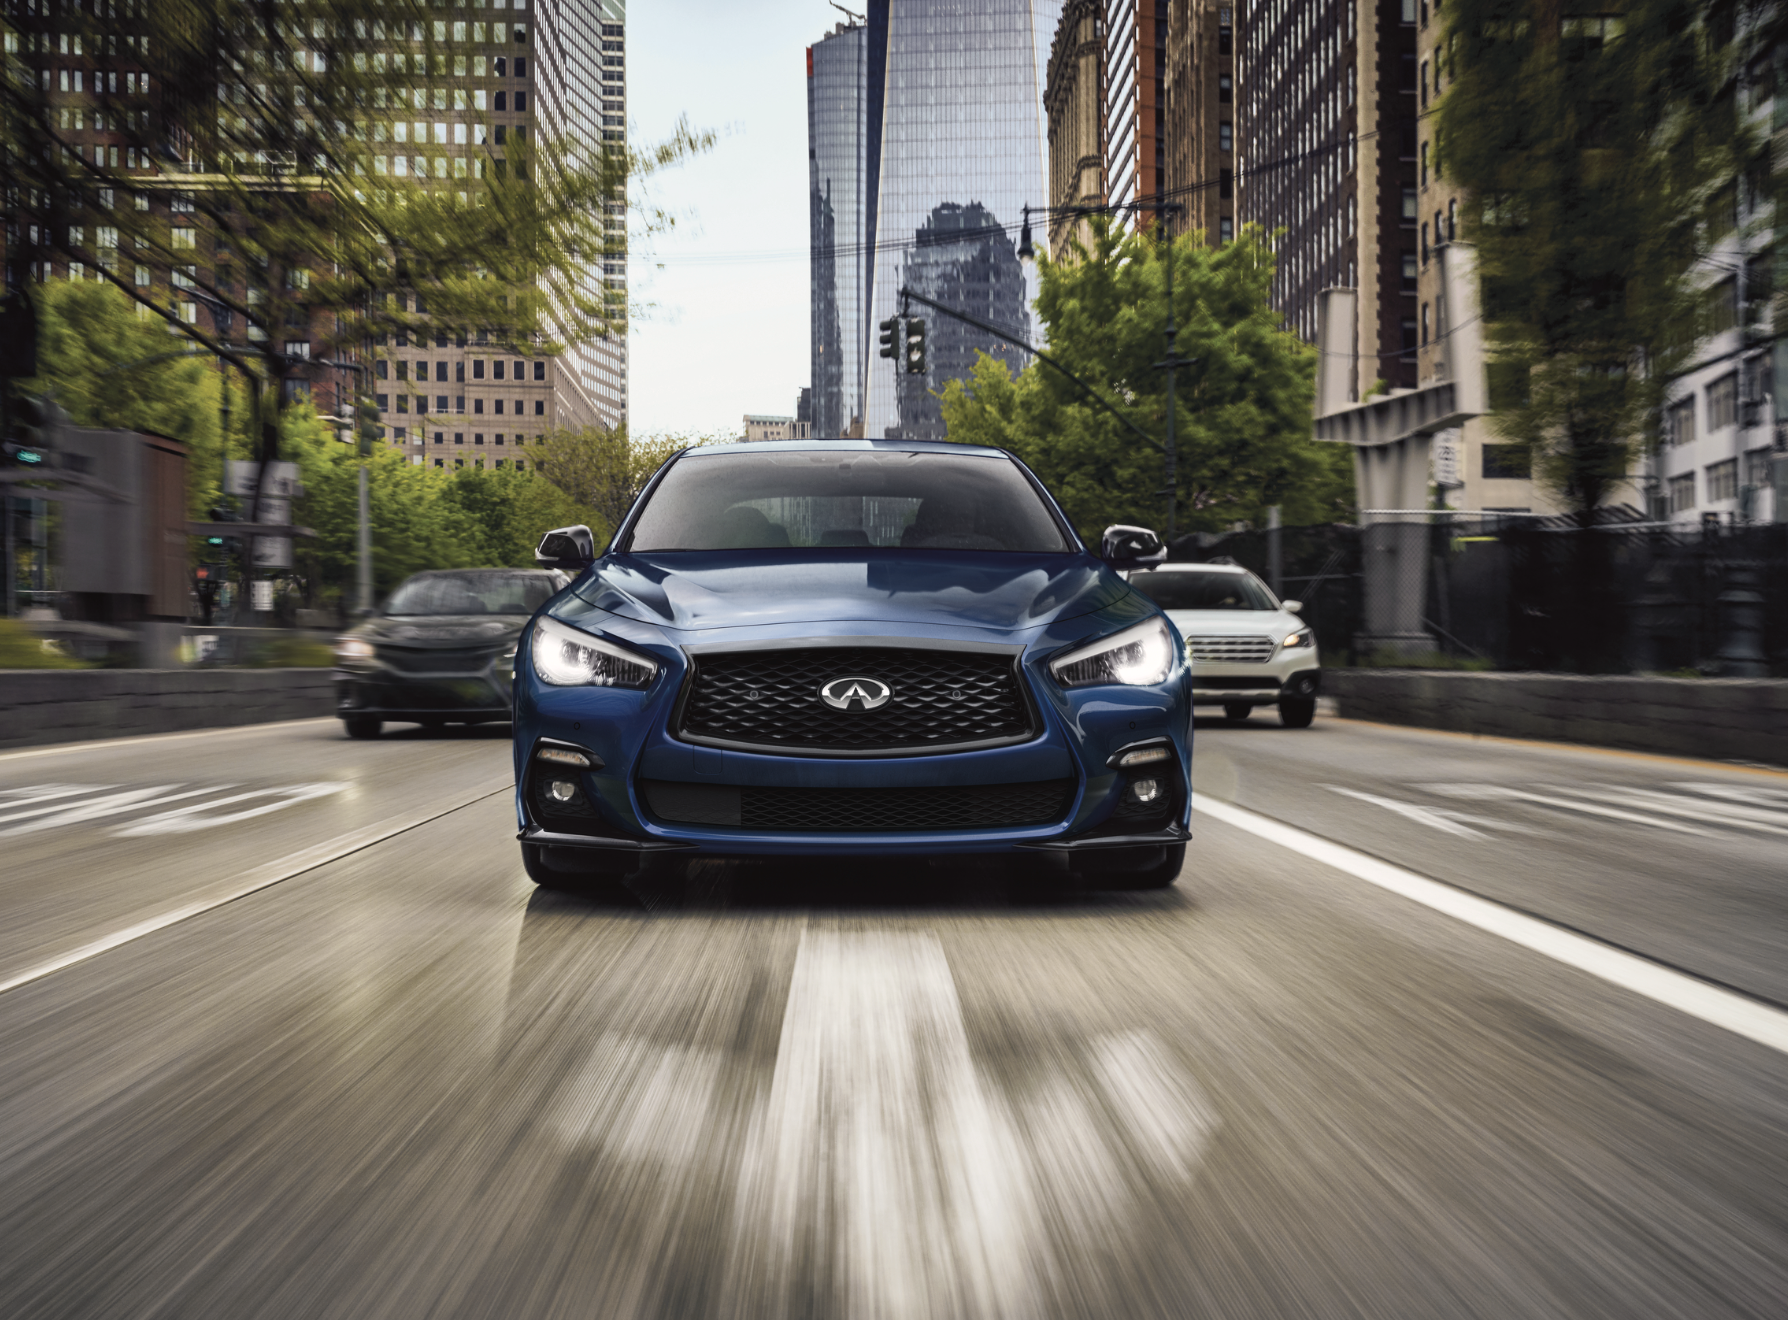 2023 INFINITI Q50: DELIVERS ADVANCED PERFORMANCE AND AN UPGRADED EXPERIENCE